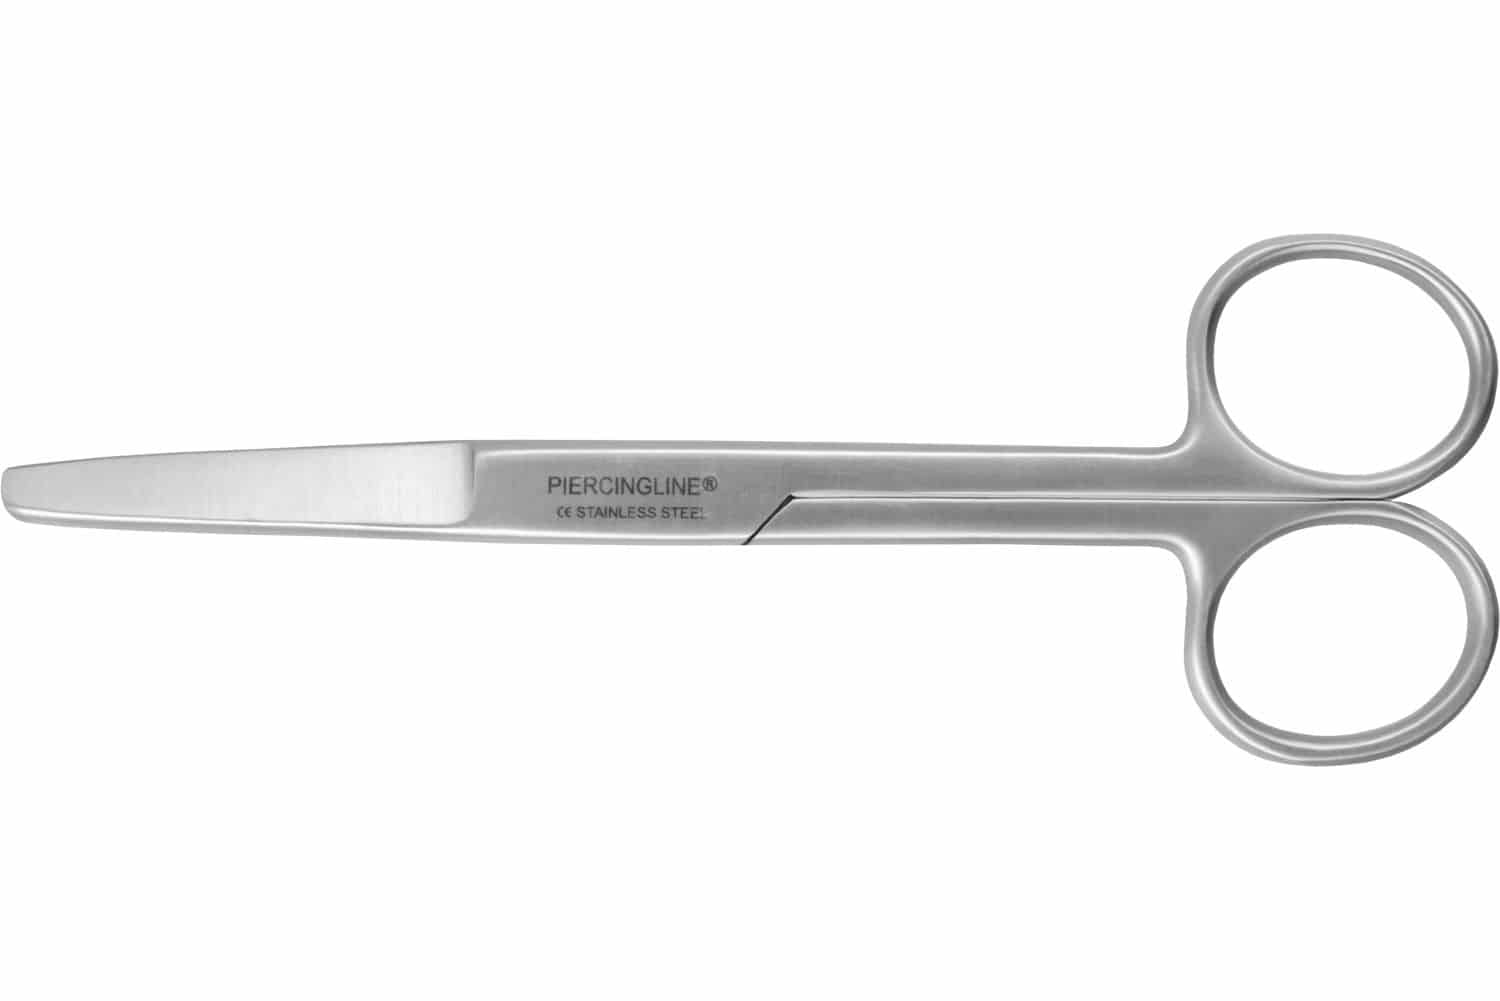 Stainless steel scissors with one flattened side